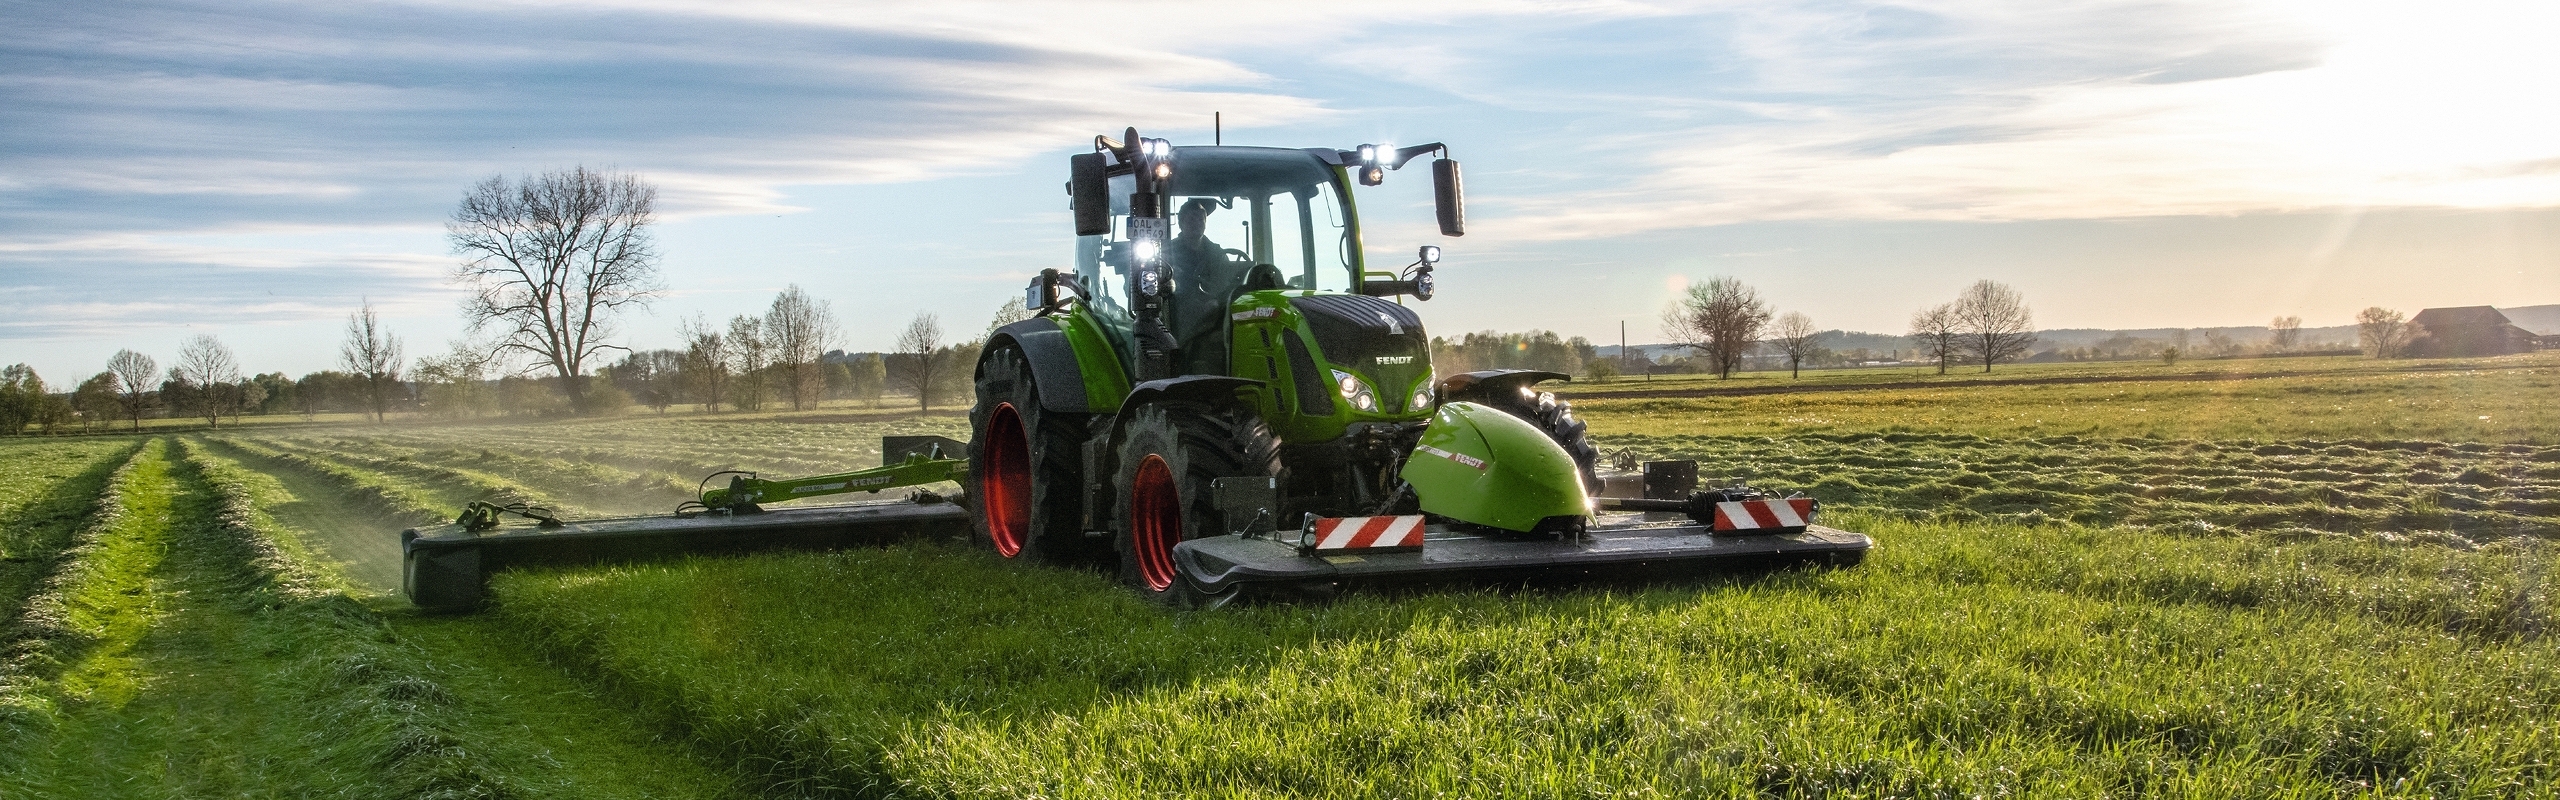 A Fendt tractor with Slicer mower combination during grassland harvesting